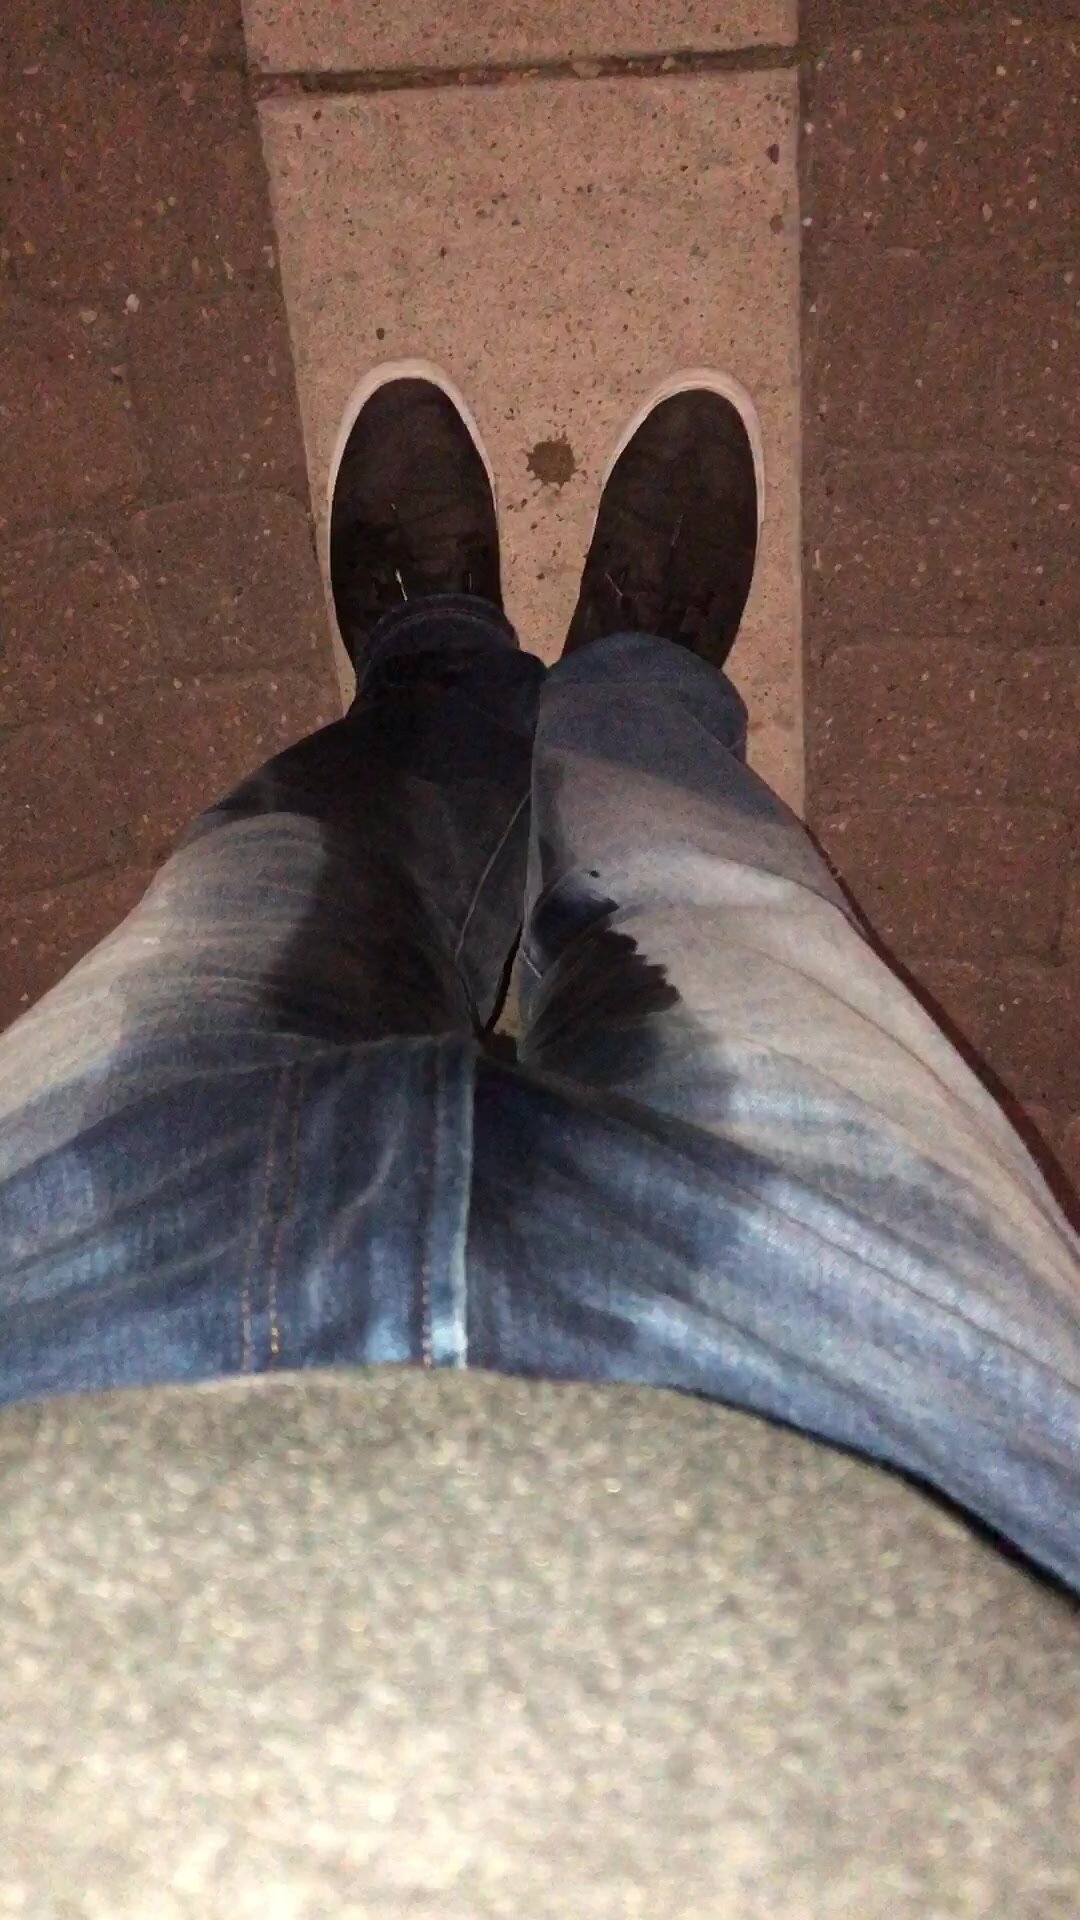 pissing in jeans on the way home